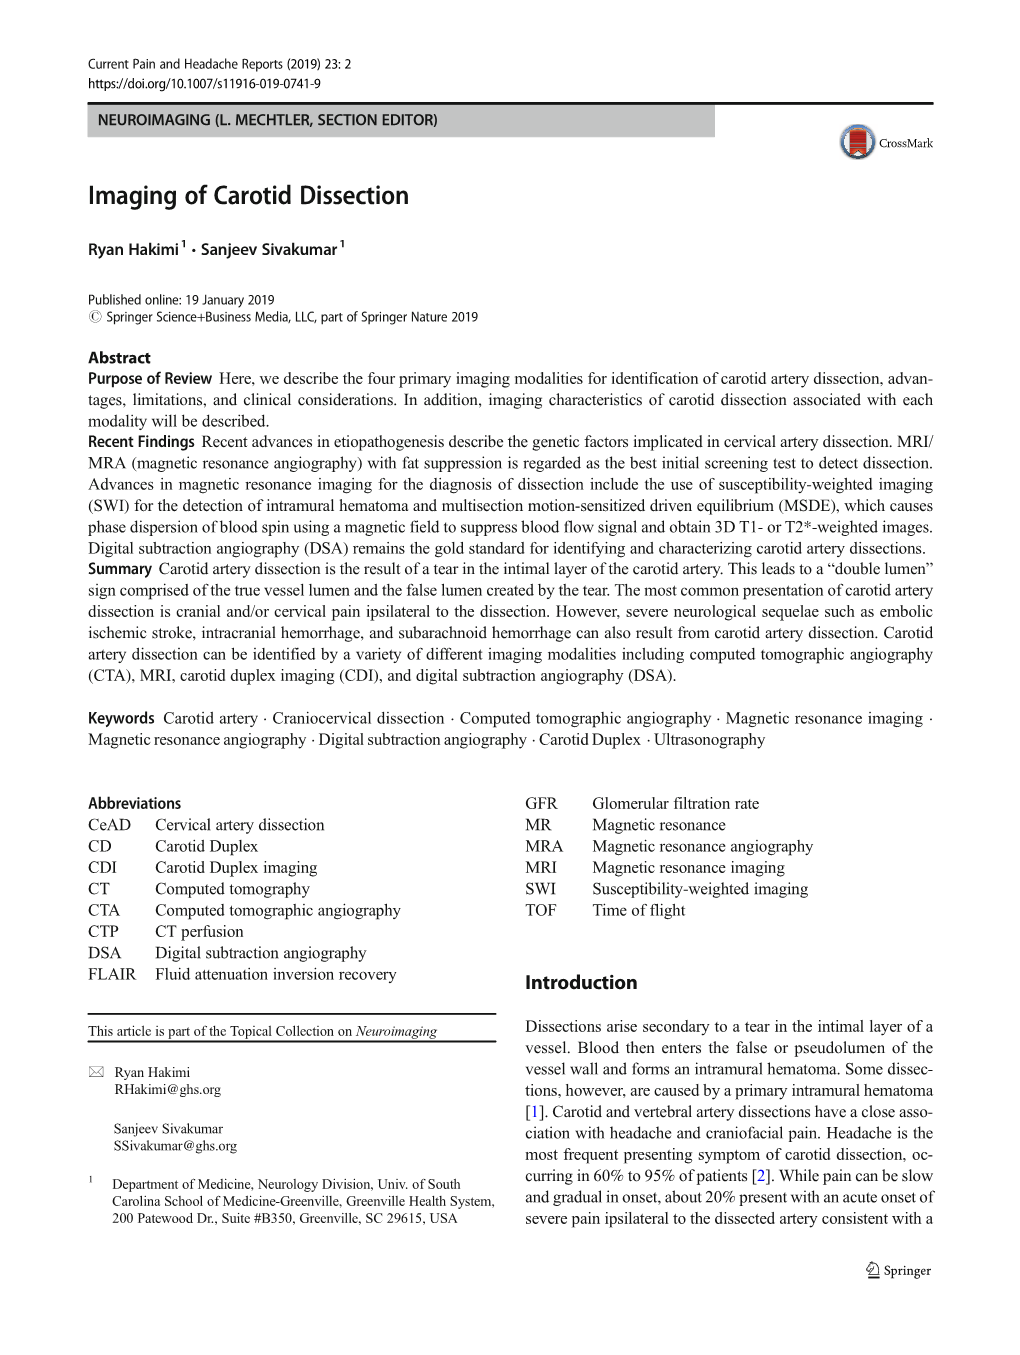 Imaging of Carotid Dissection